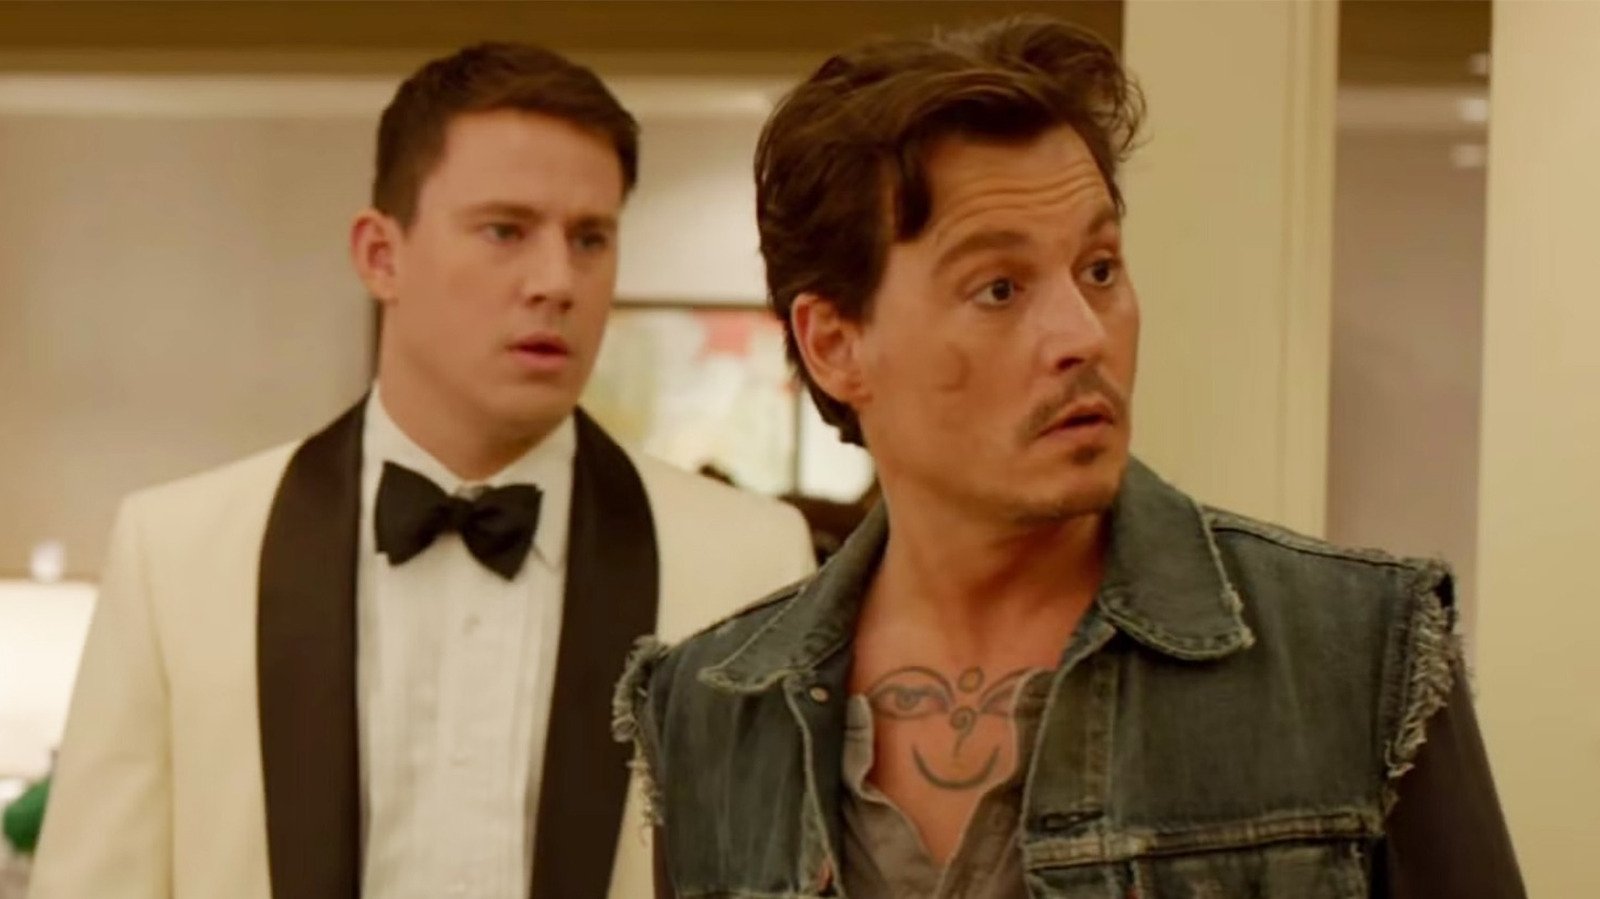 Johnny Depp's Hilarious 21 Jump Street Cameo Came With One Stipulation